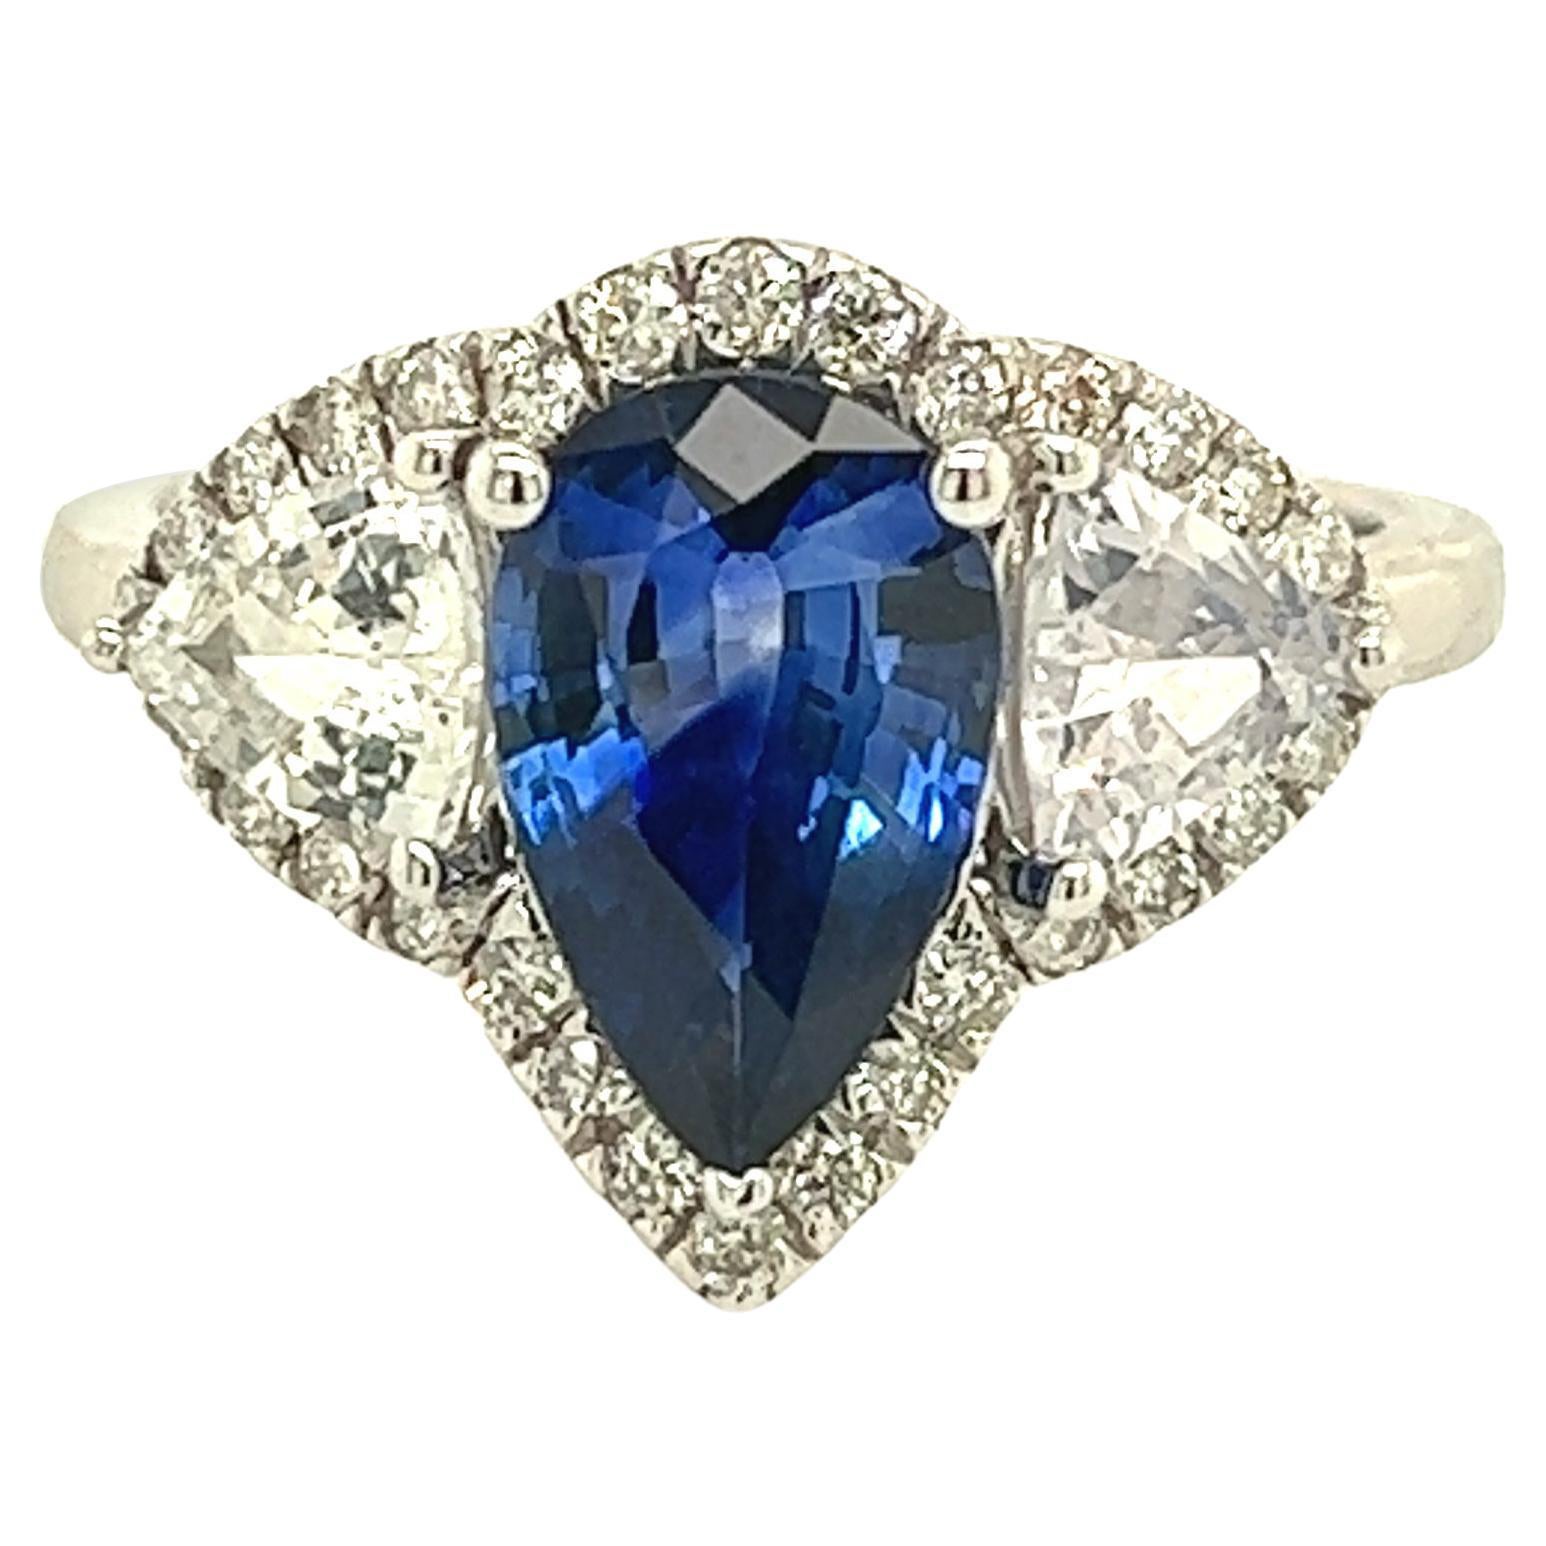 Natural Sapphire Diamond Ring 14k W Gold 2.78 TCW Certified For Sale